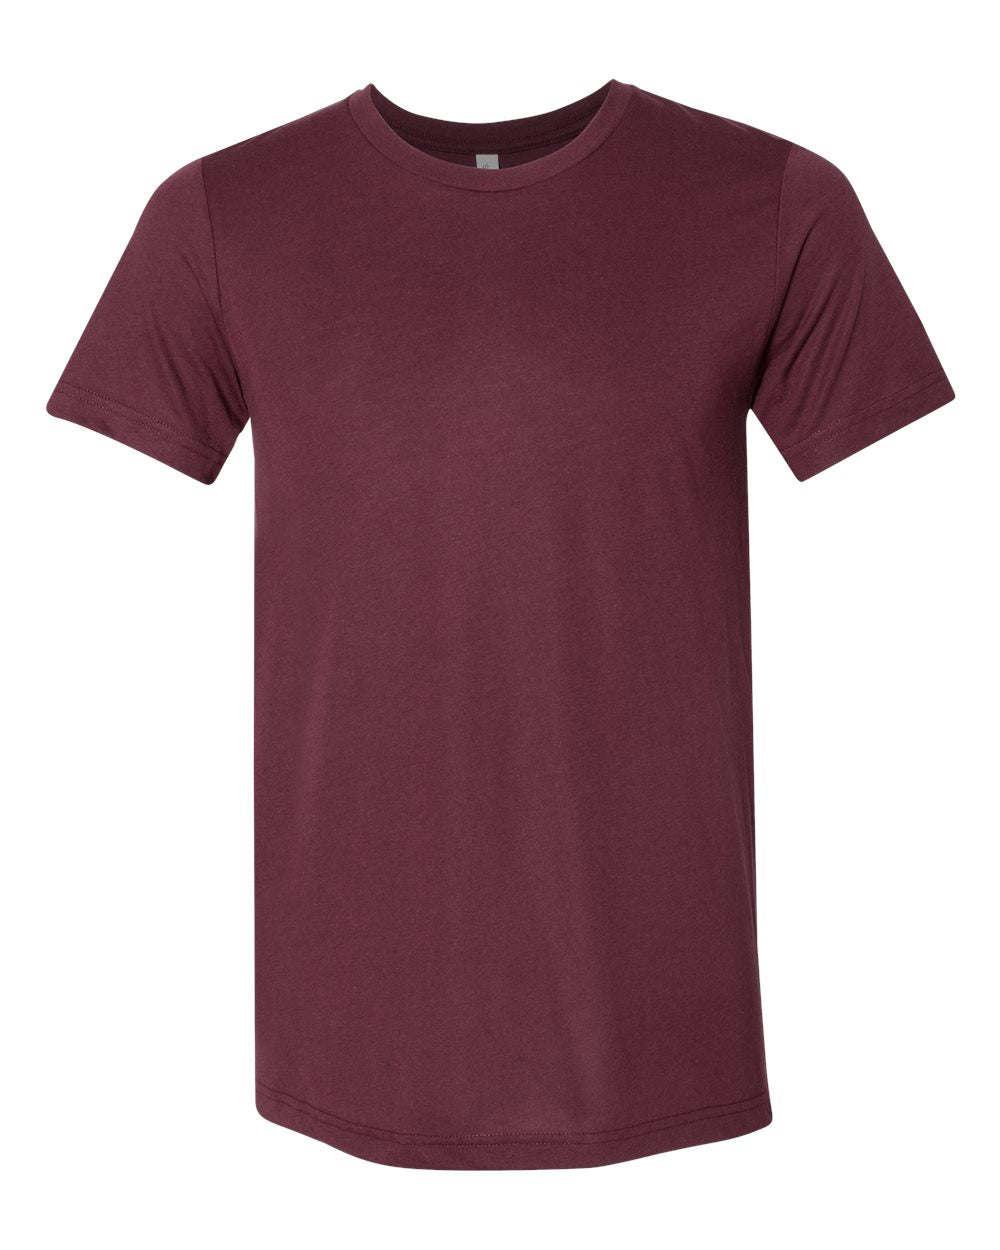 Bella + Canvas Triblend Tee (3413) in Solid Maroon Triblend